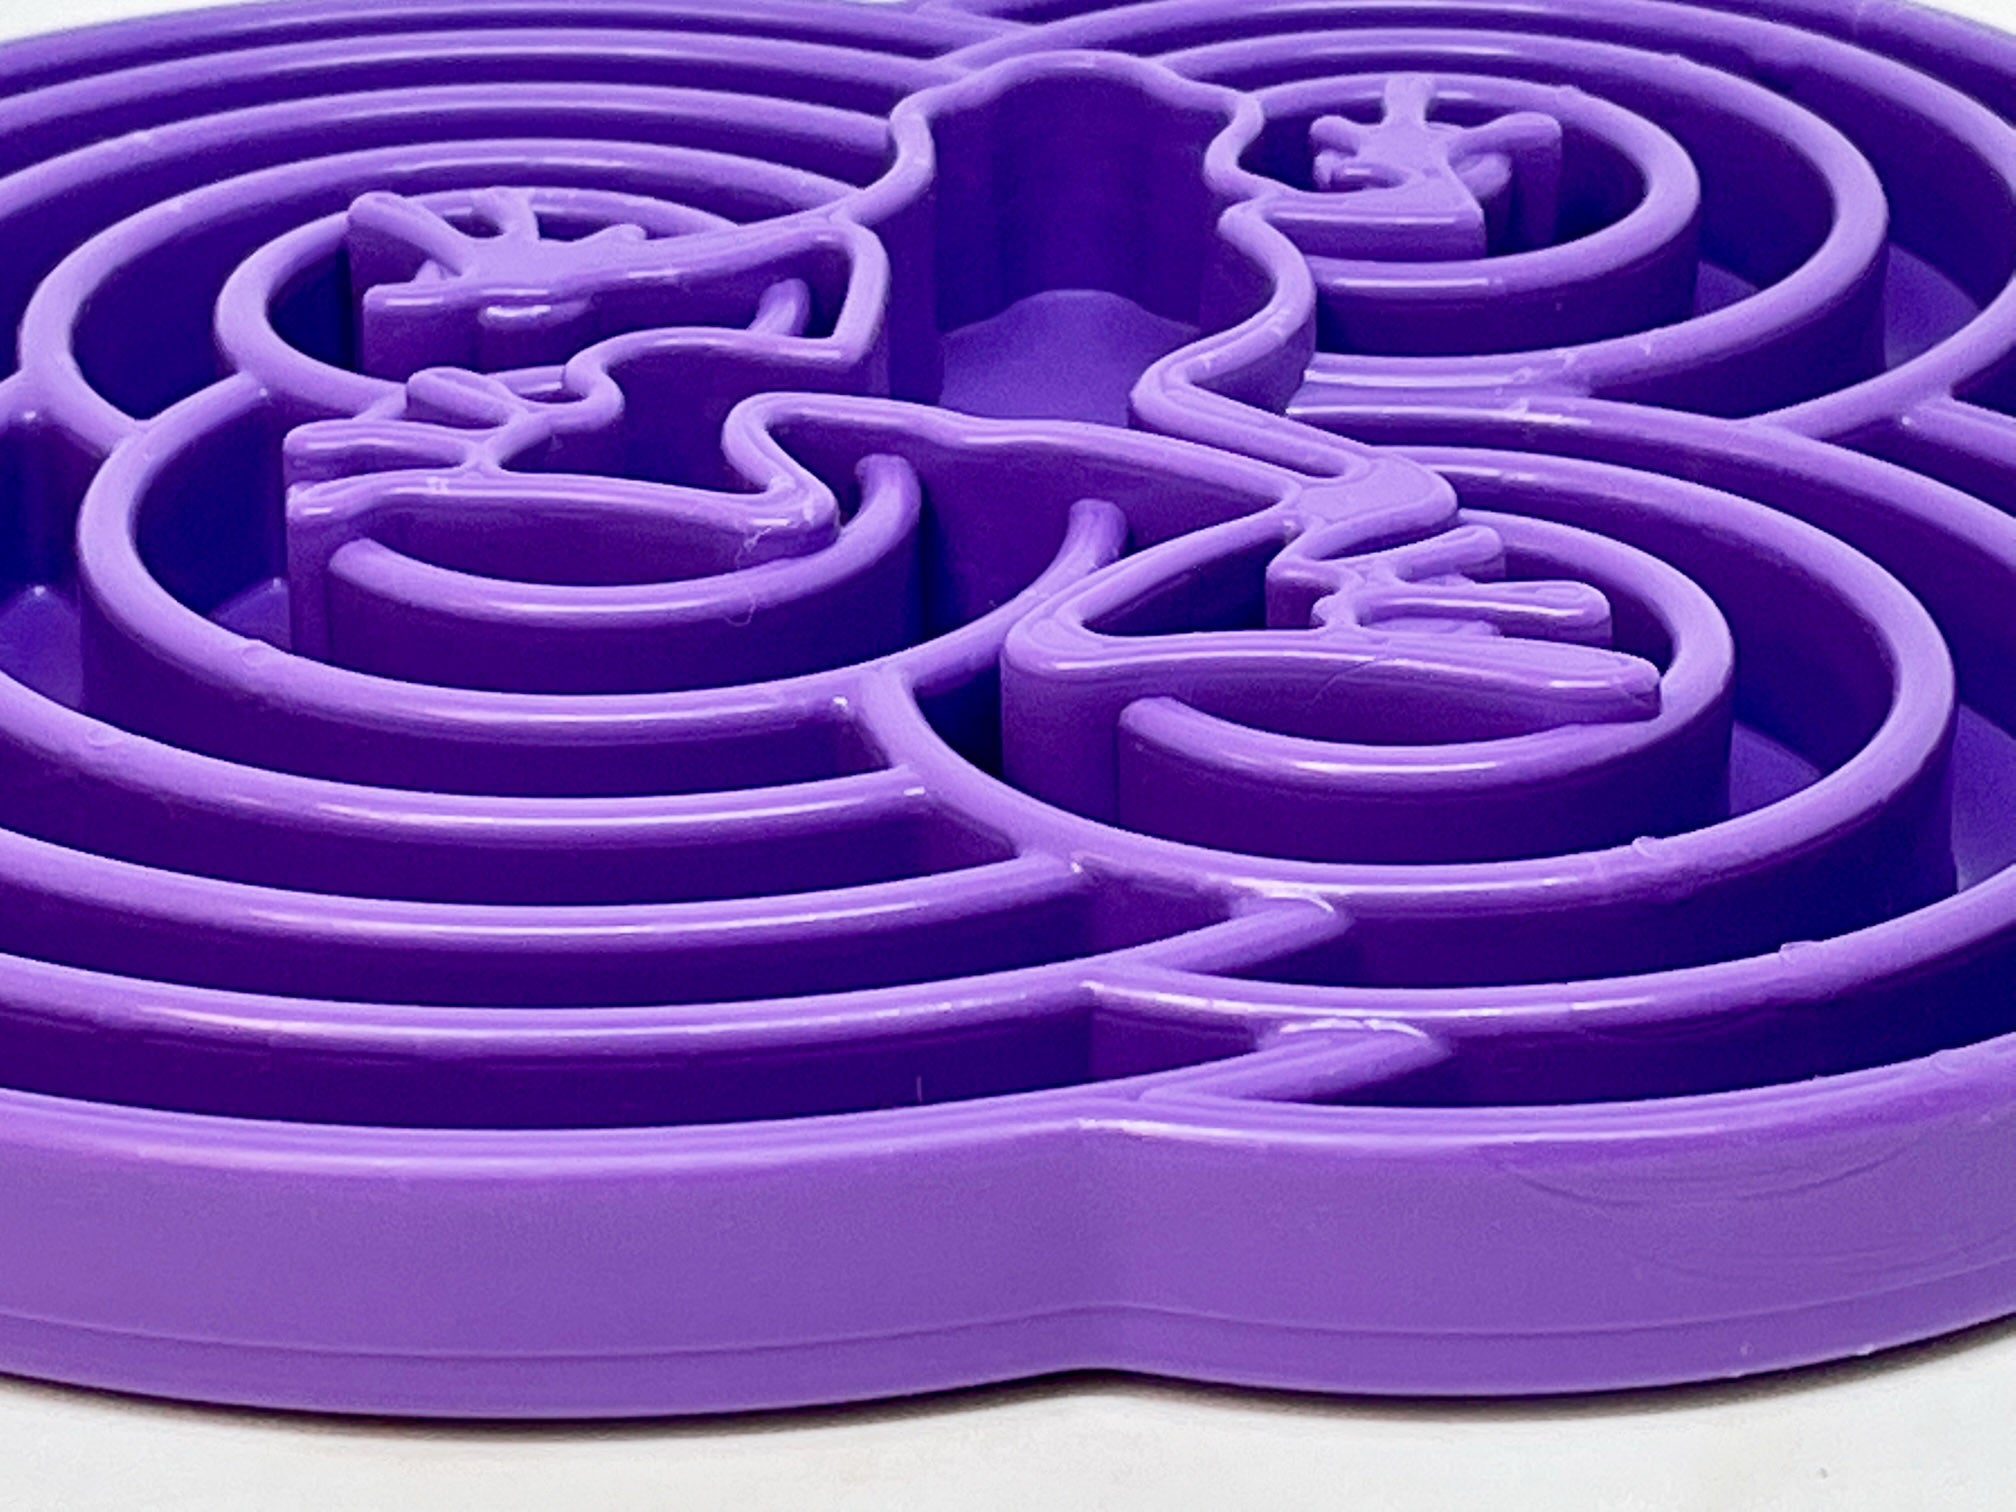 Water Frog Design eTray Enrichment Tray for Dogs Purple